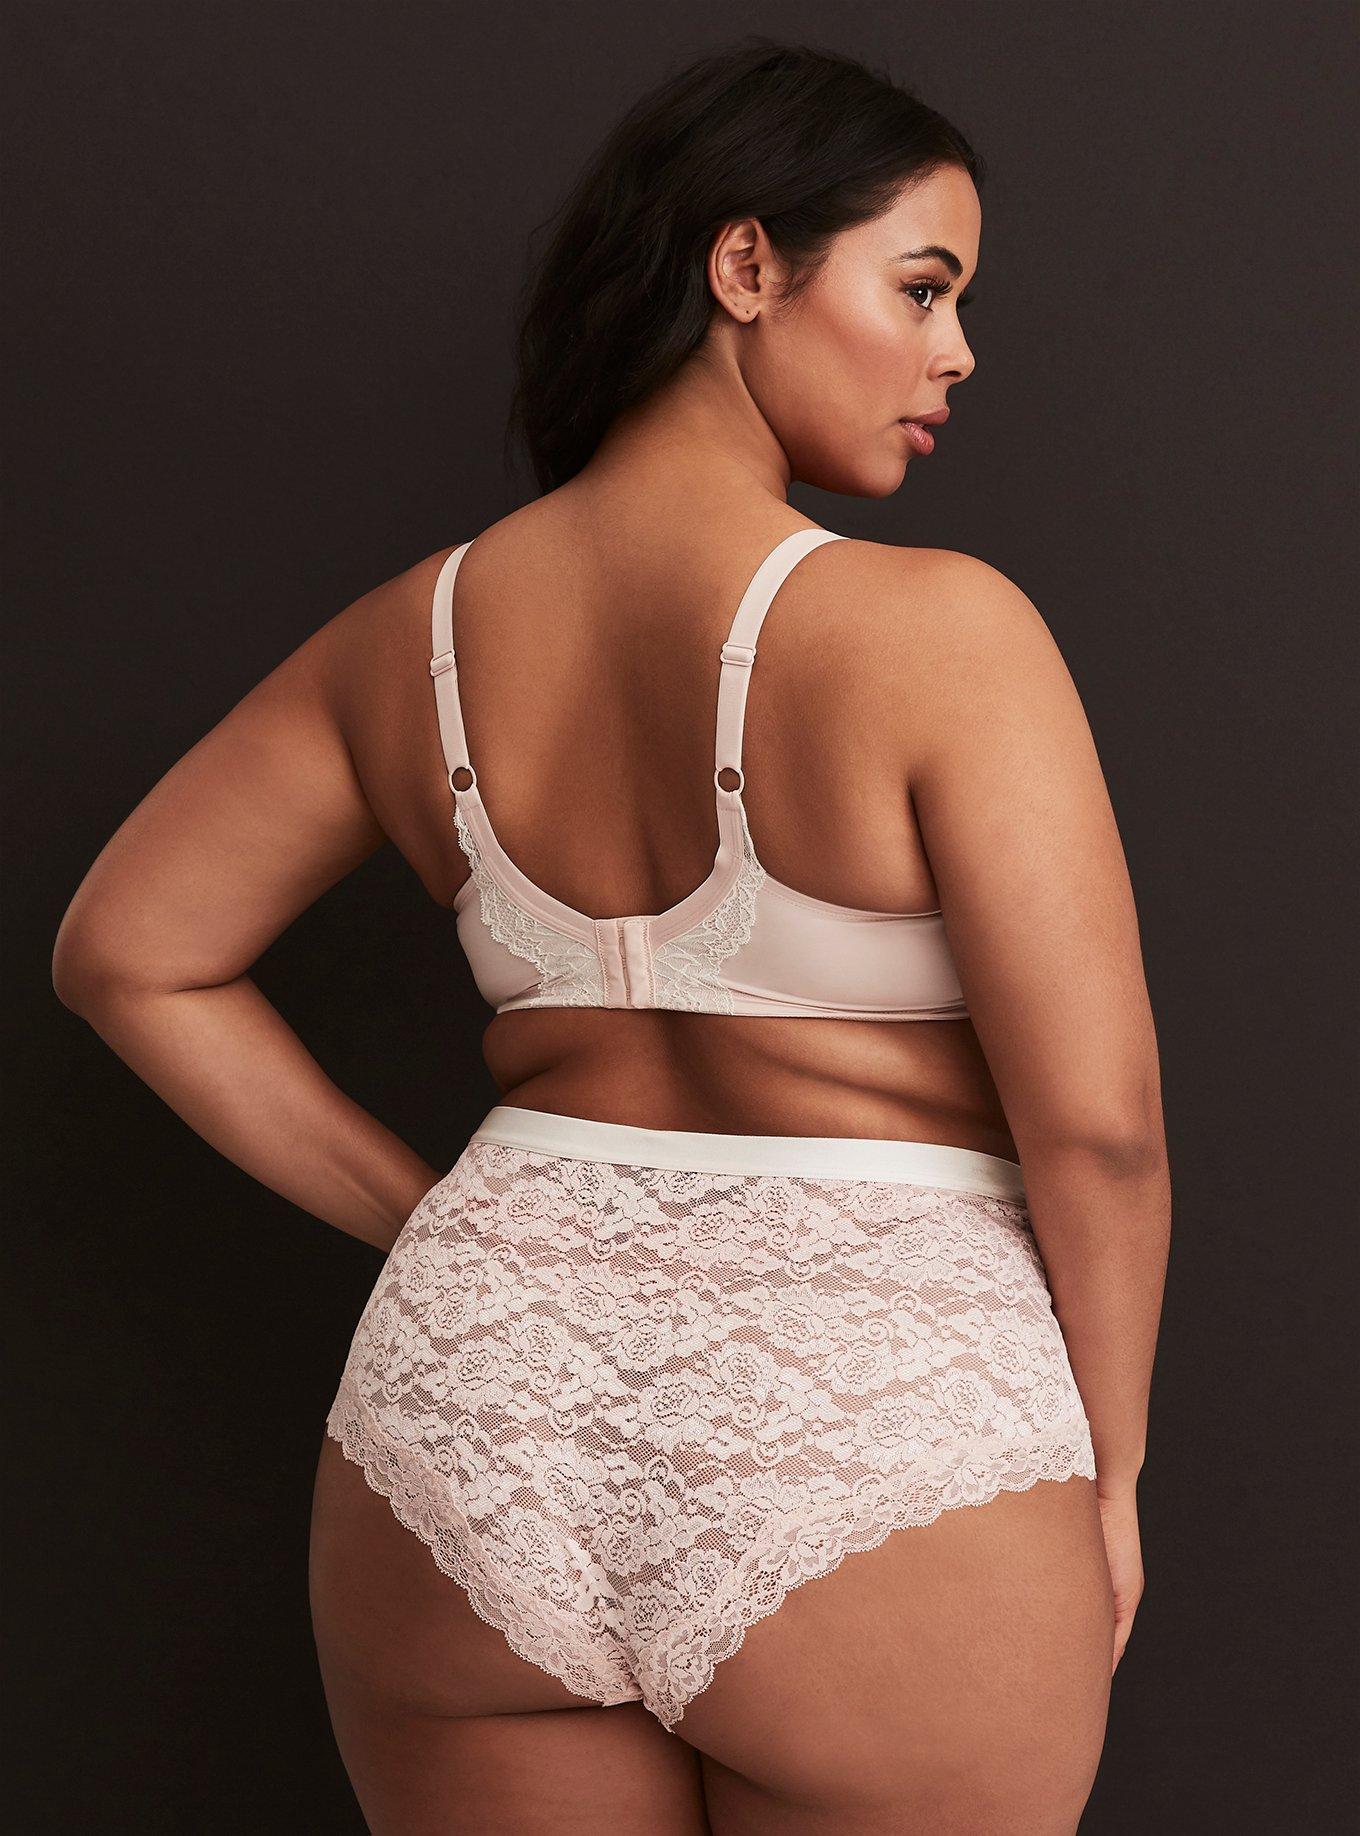 Plus Size - Straps And Rings Lace Thong Panty - Torrid